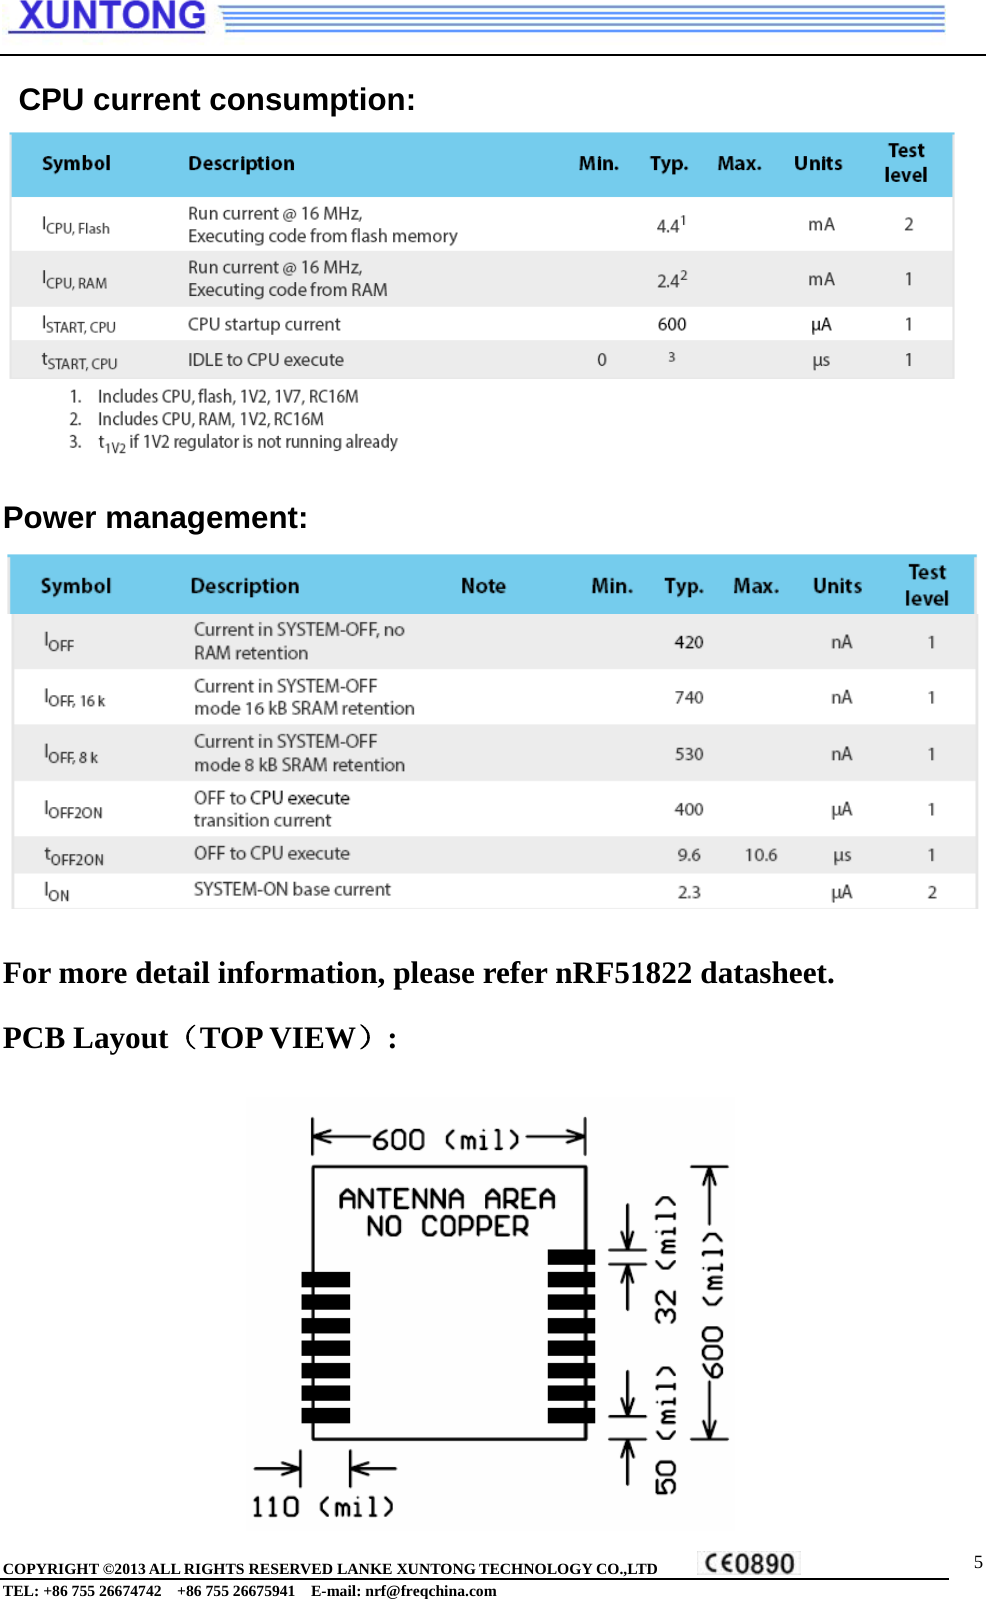    CPU current consumption:  Power management:       For more detail information, please refer nRF51822 datasheet. PCB Layout（TOP VIEW）:               COPYRIGHT ©2013 ALL RIGHTS RESERVED LANKE XUNTONG TECHNOLOGY CO.,LTD           TEL: +86 755 26674742    +86 755 26675941  E-mail: nrf@freqchina.com  5